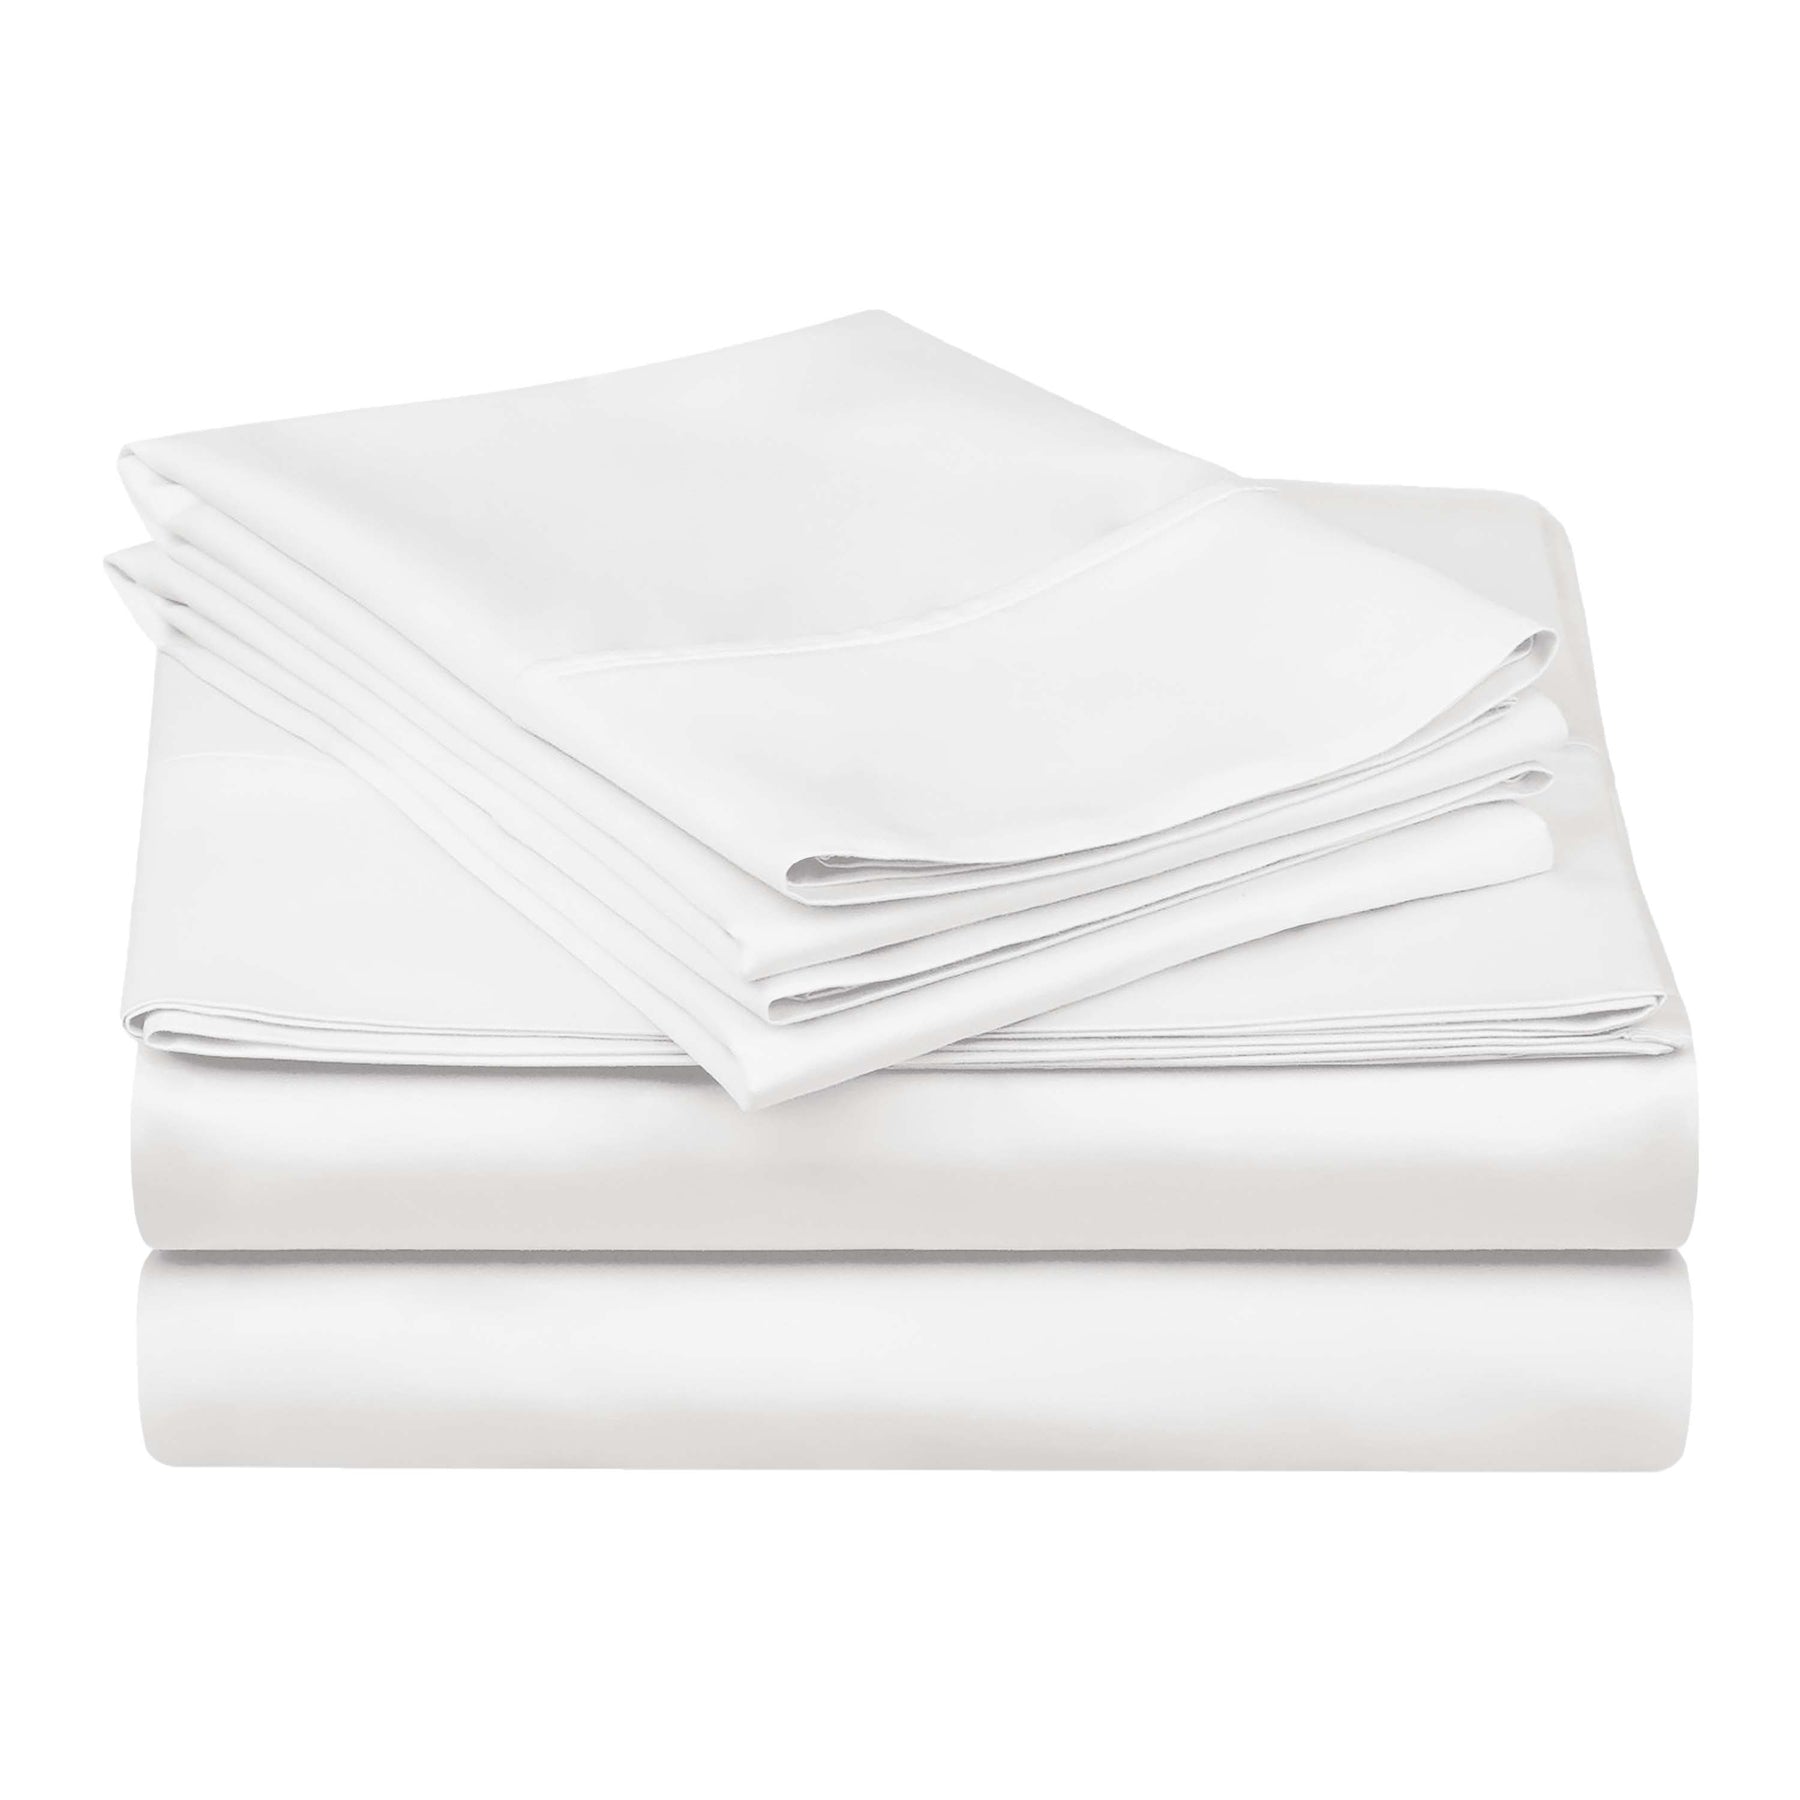 Egyptian Cotton 300 Thread Count Solid Deep Pocket Sheet Set - White